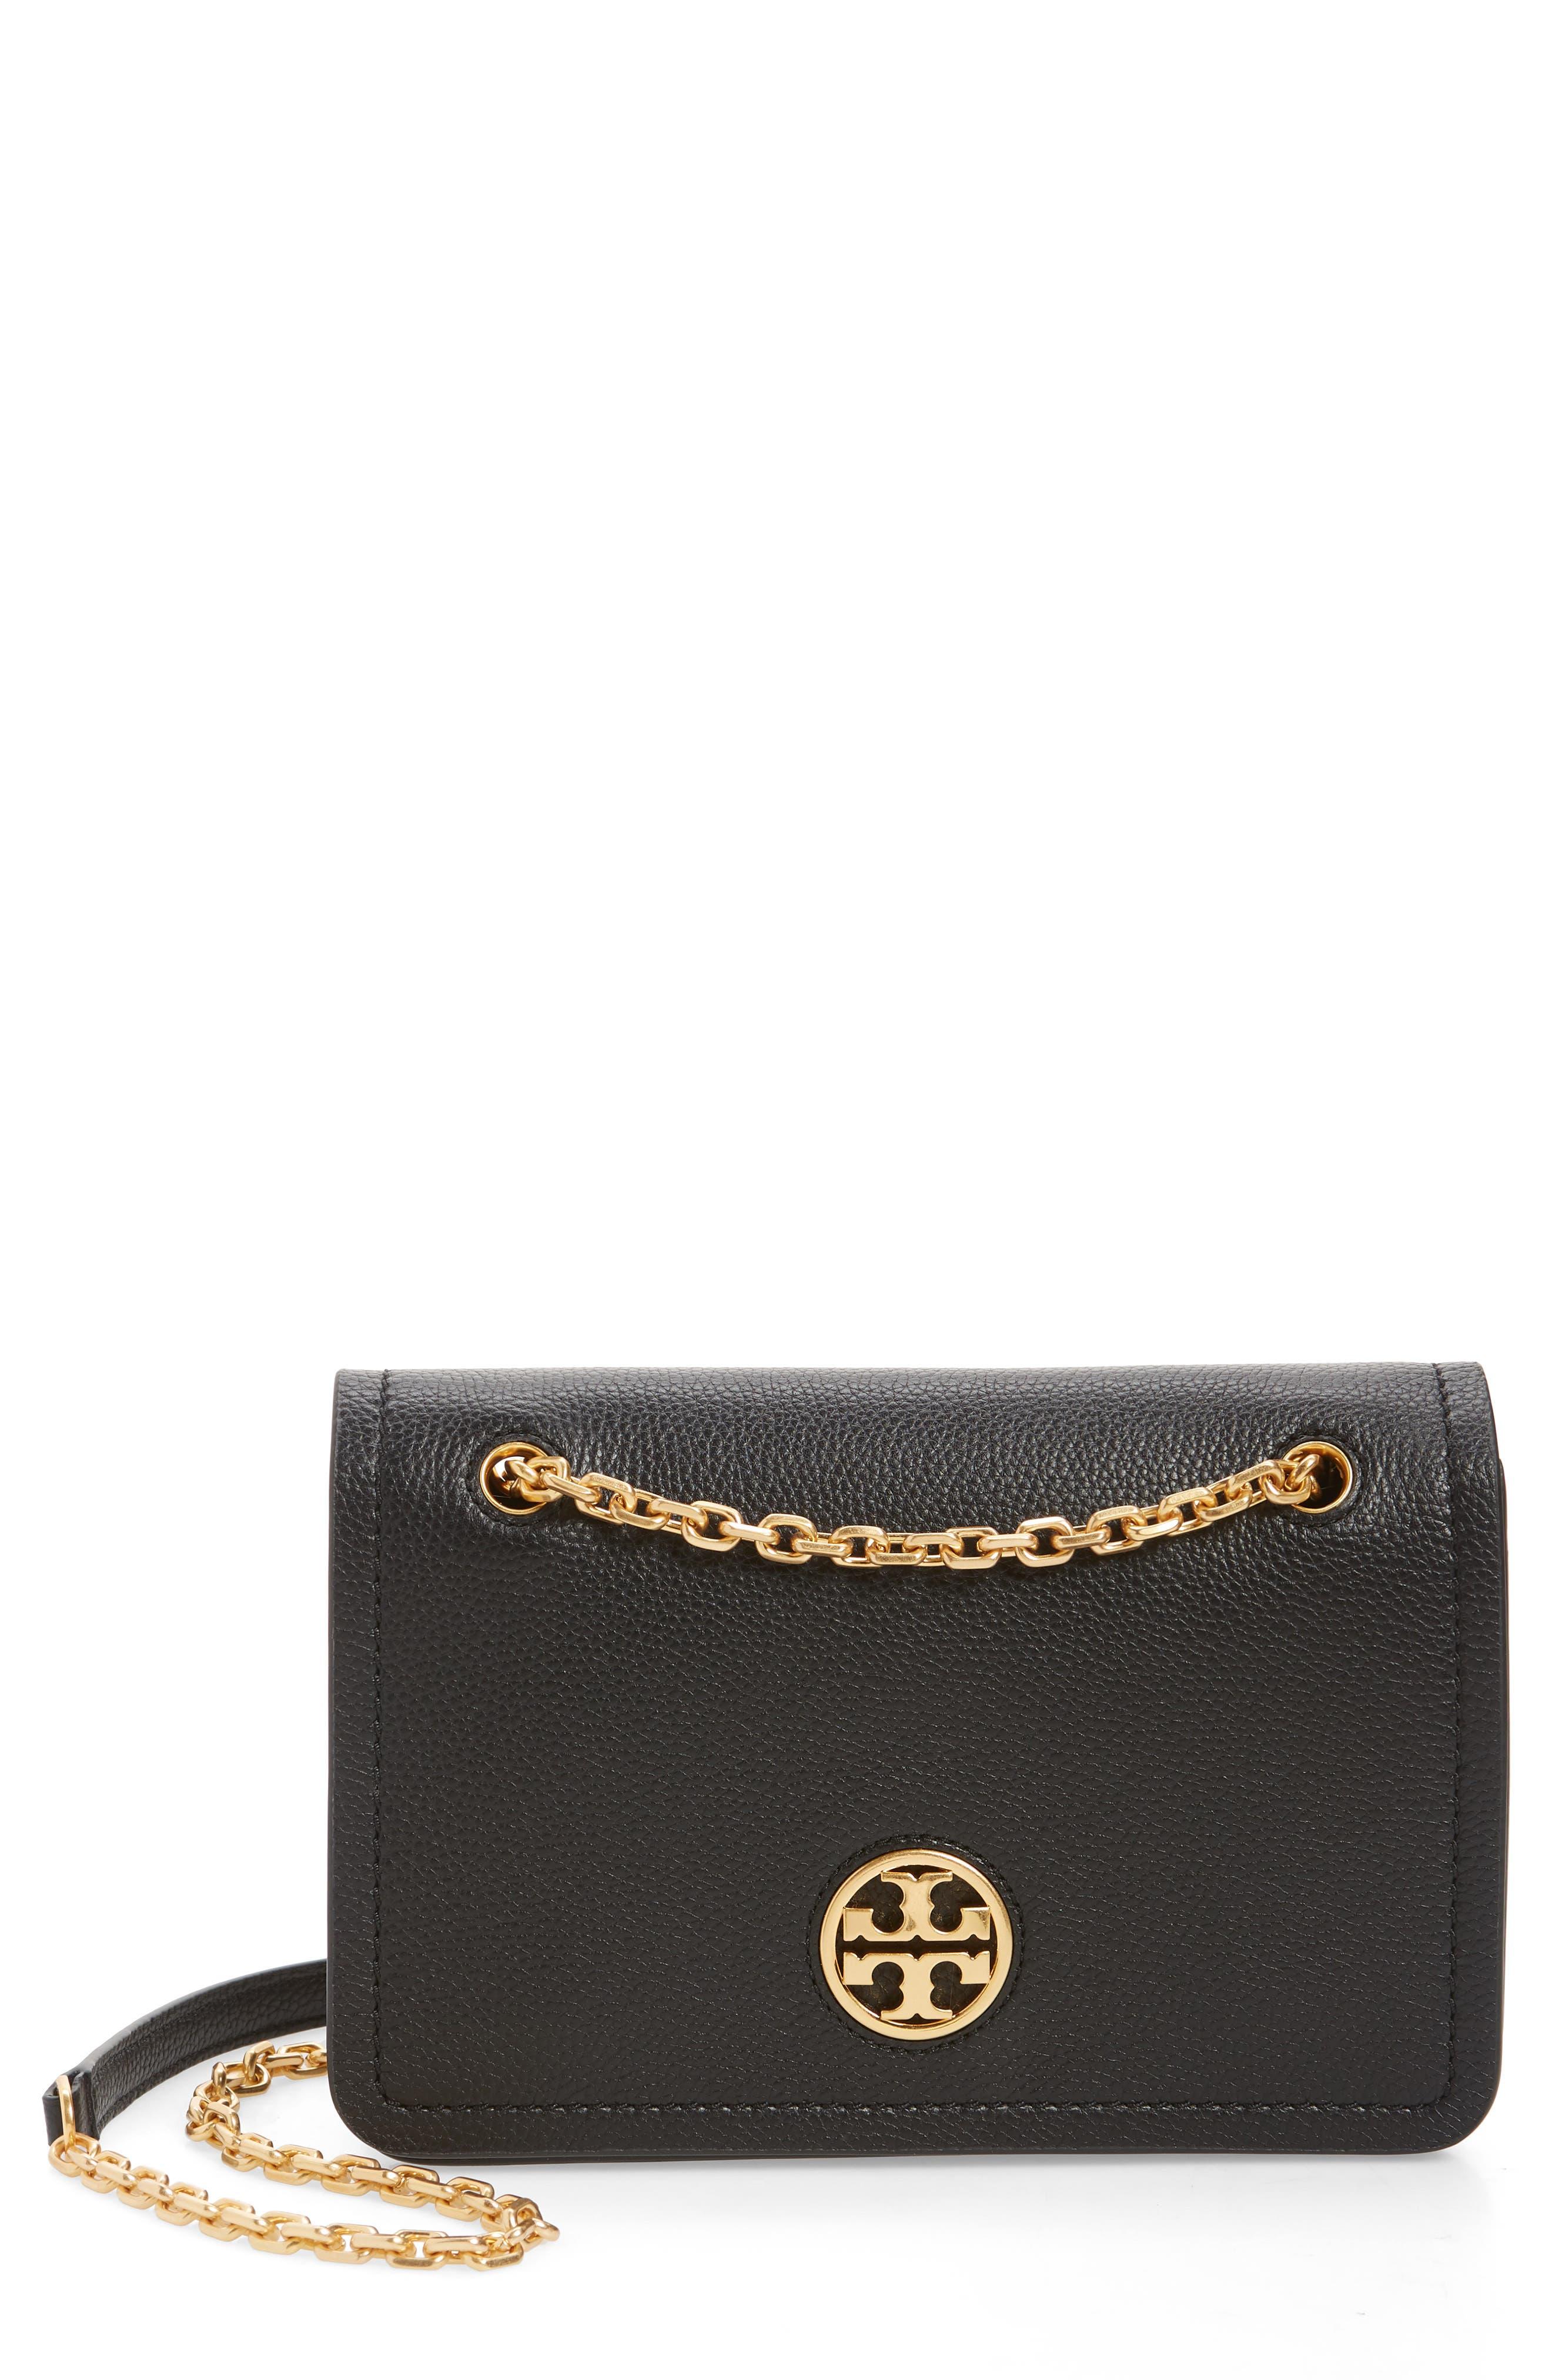 Tory Burch Carson Convertible Leather Crossbody Bag in Black | Lyst